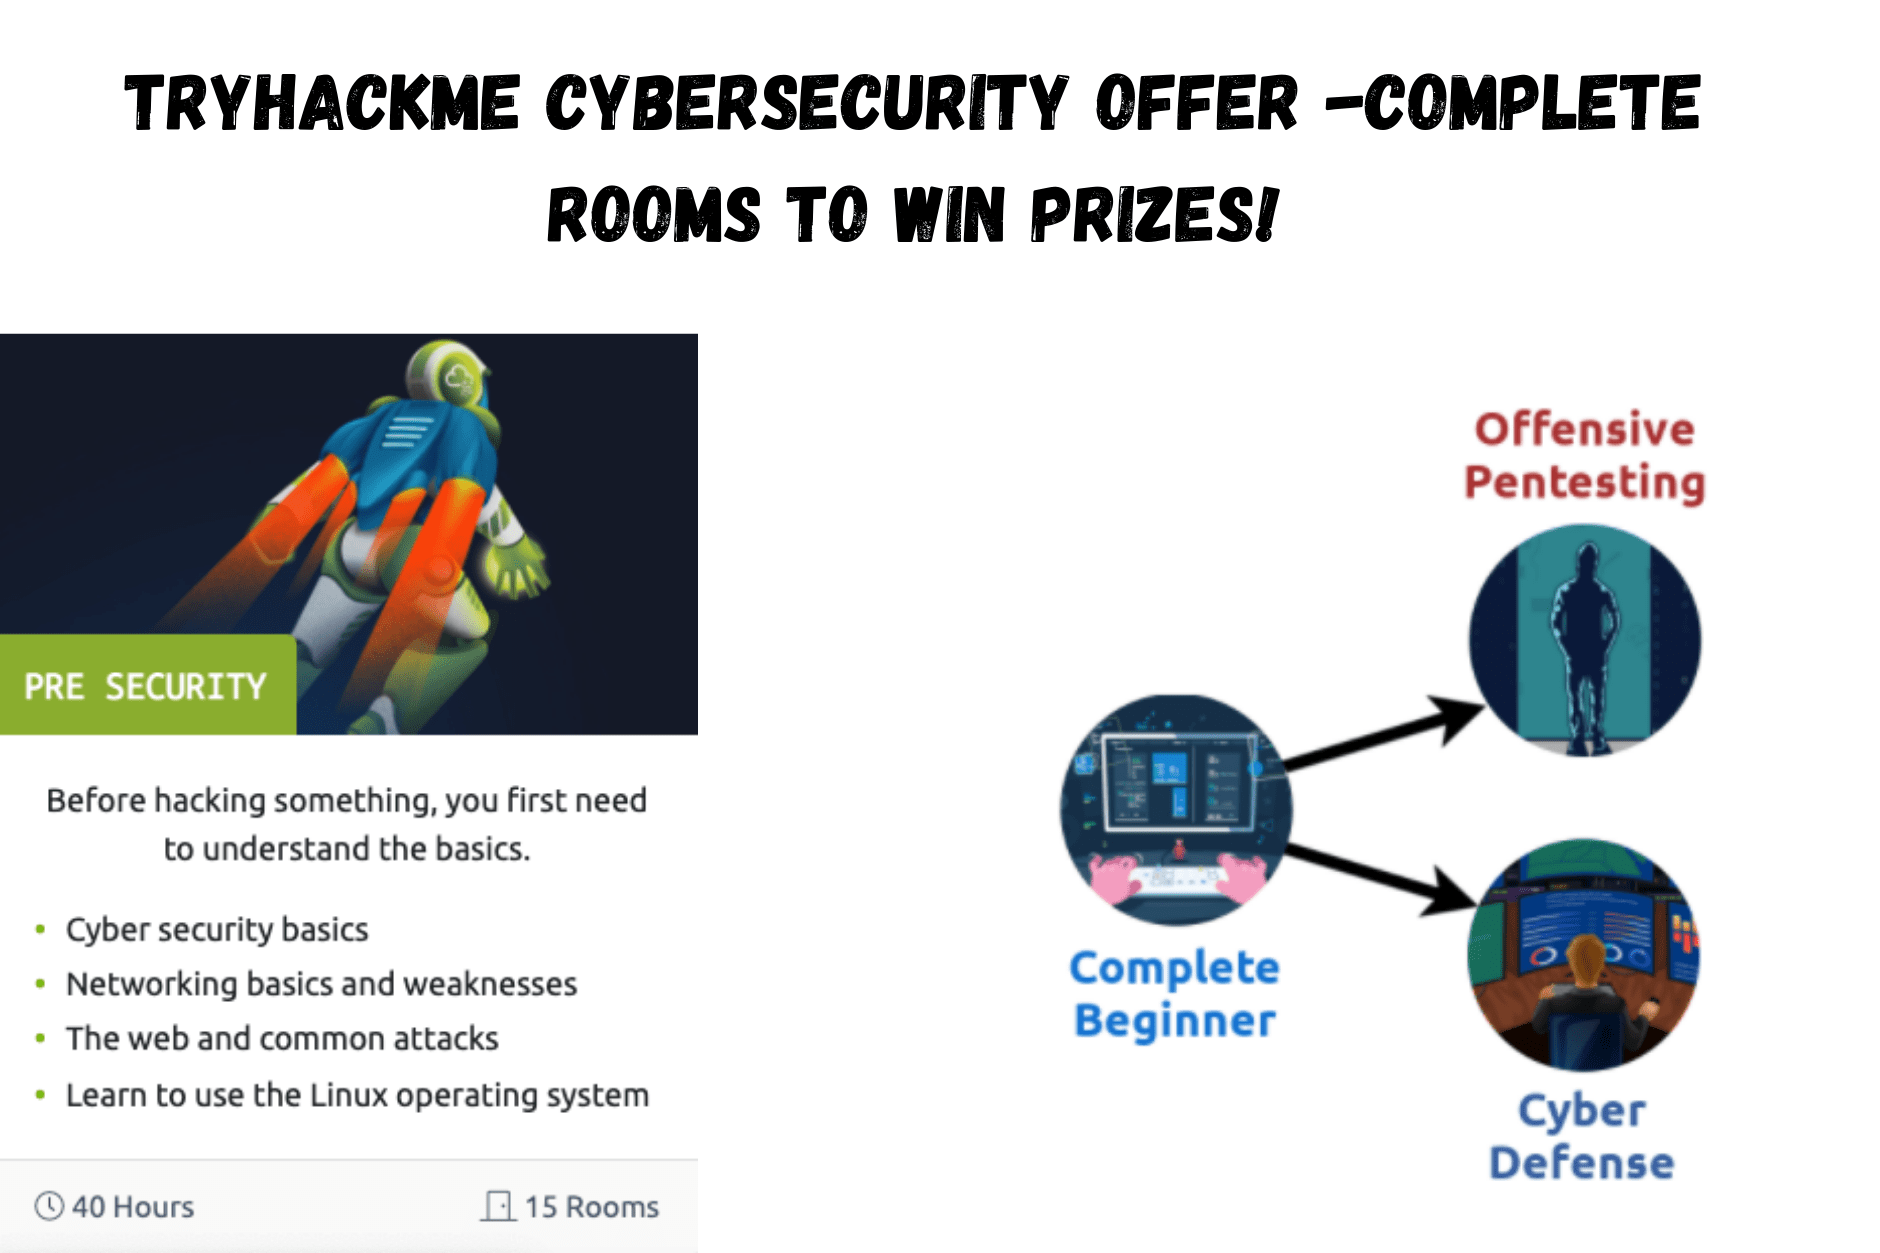 TryHackMe CyberSecurity Offer -Complete rooms to win prizes!